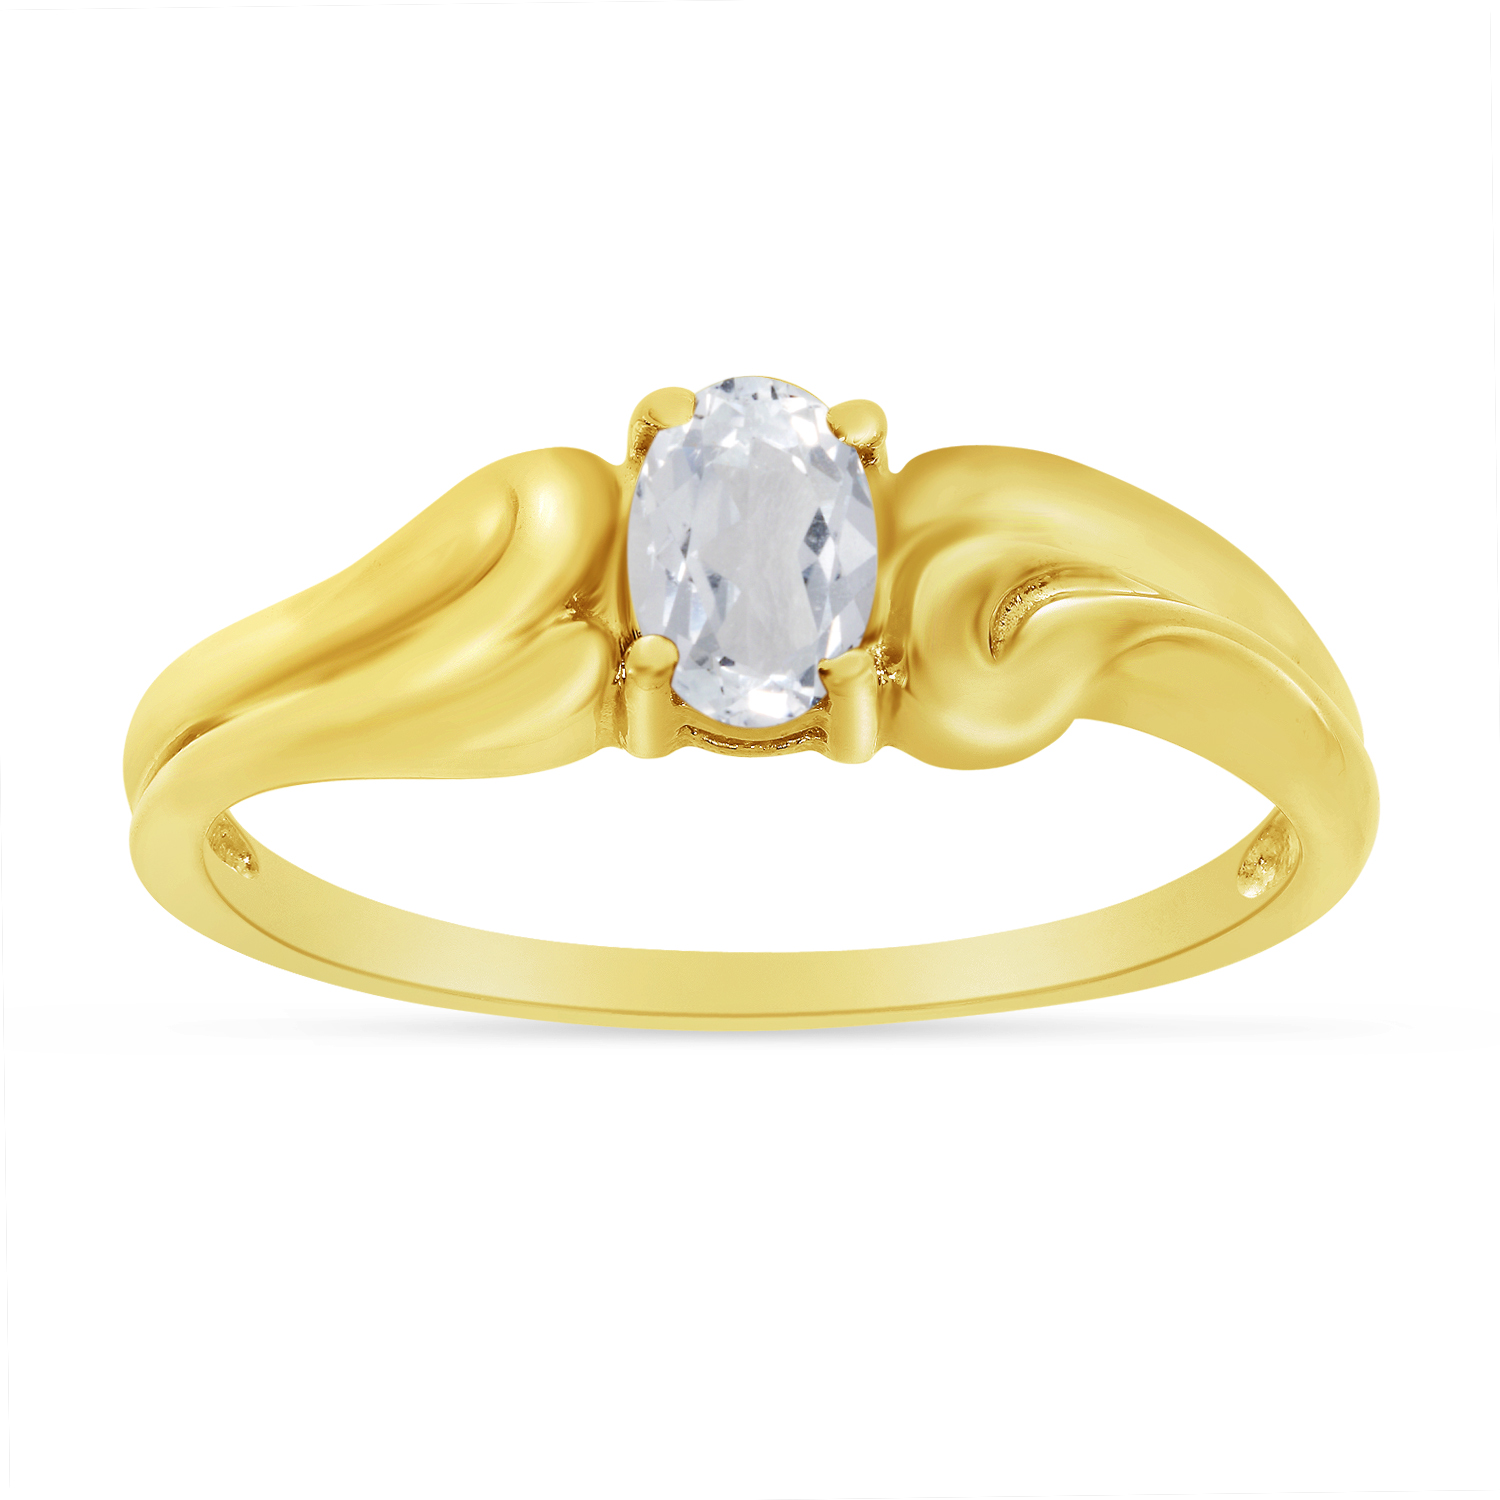 Direct-Jewelry 14k Yellow Gold Oval White Topaz Ring